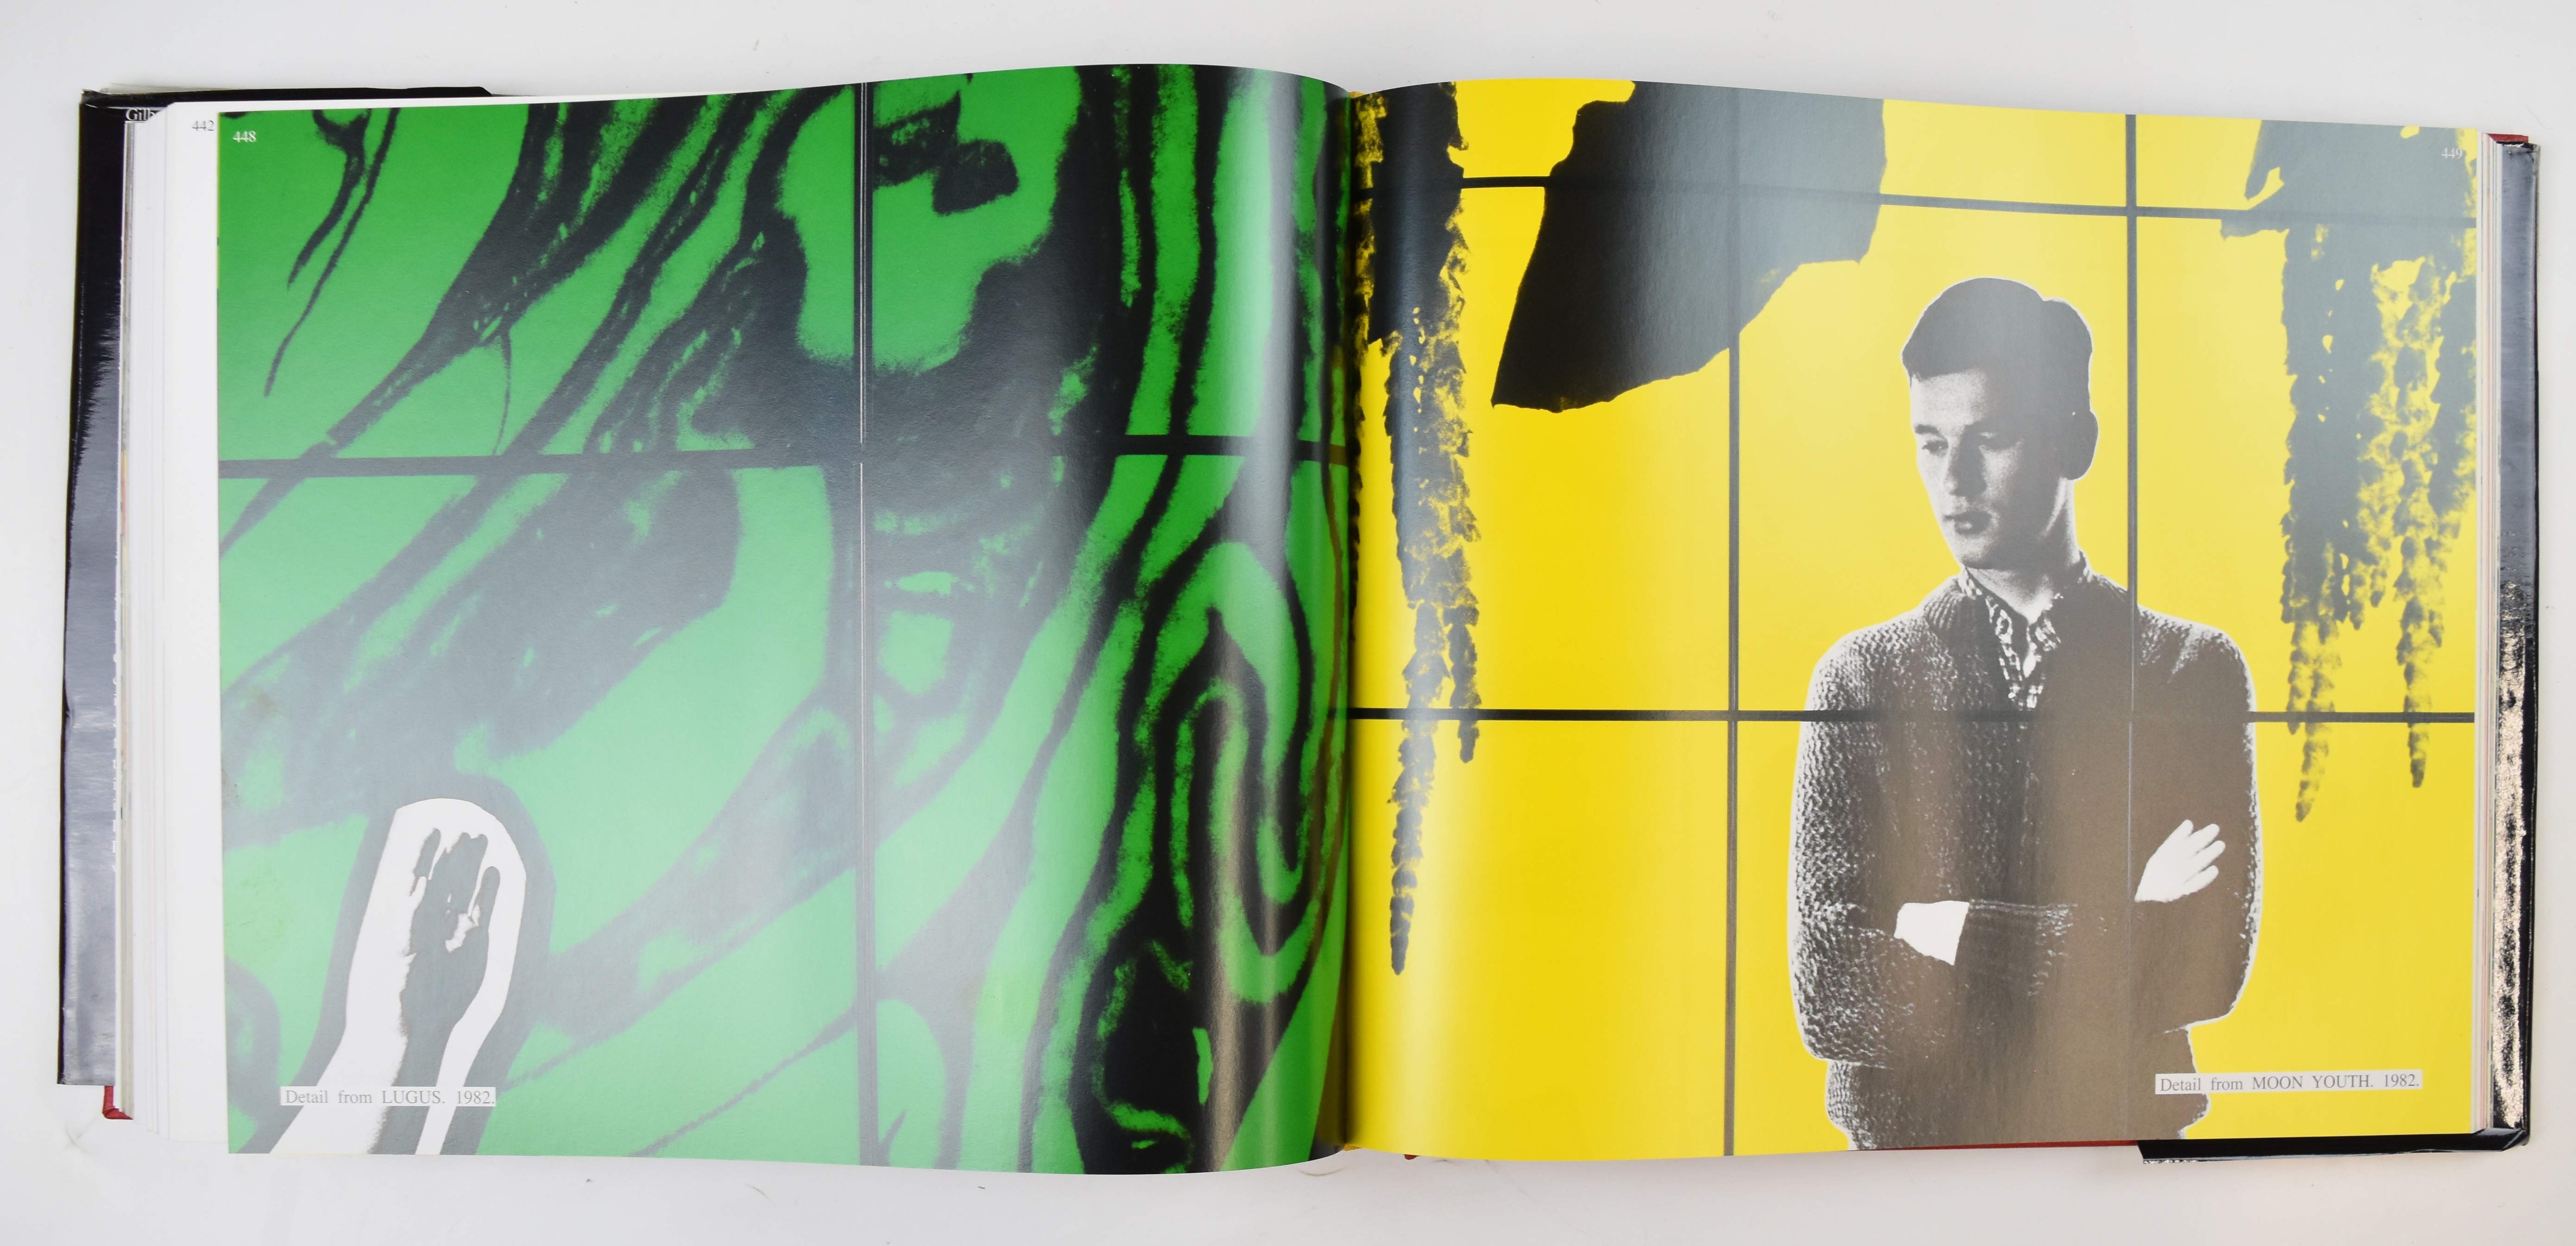 Gilbert & George The Complete Pictures 1971-2005 in 2 volumes with an introduction by Rudi Fuchs, - Image 5 of 5